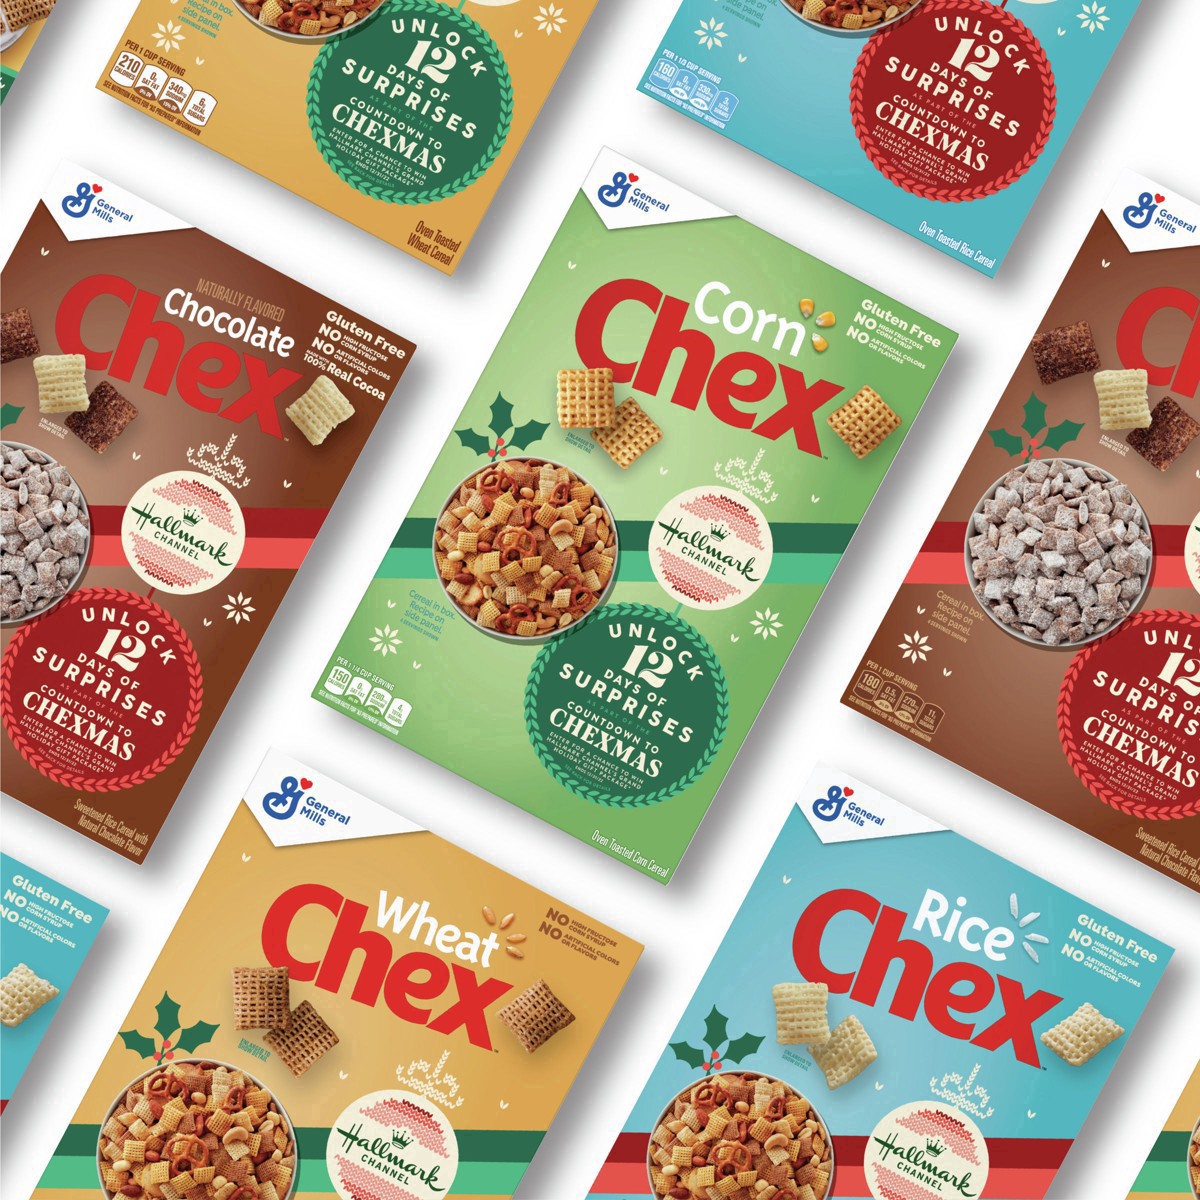 slide 36 of 122, Chex Chocolate Chex Cereal, Gluten Free Breakfast Cereal, Made with Whole Grain, 12.8 oz, 14.25 oz